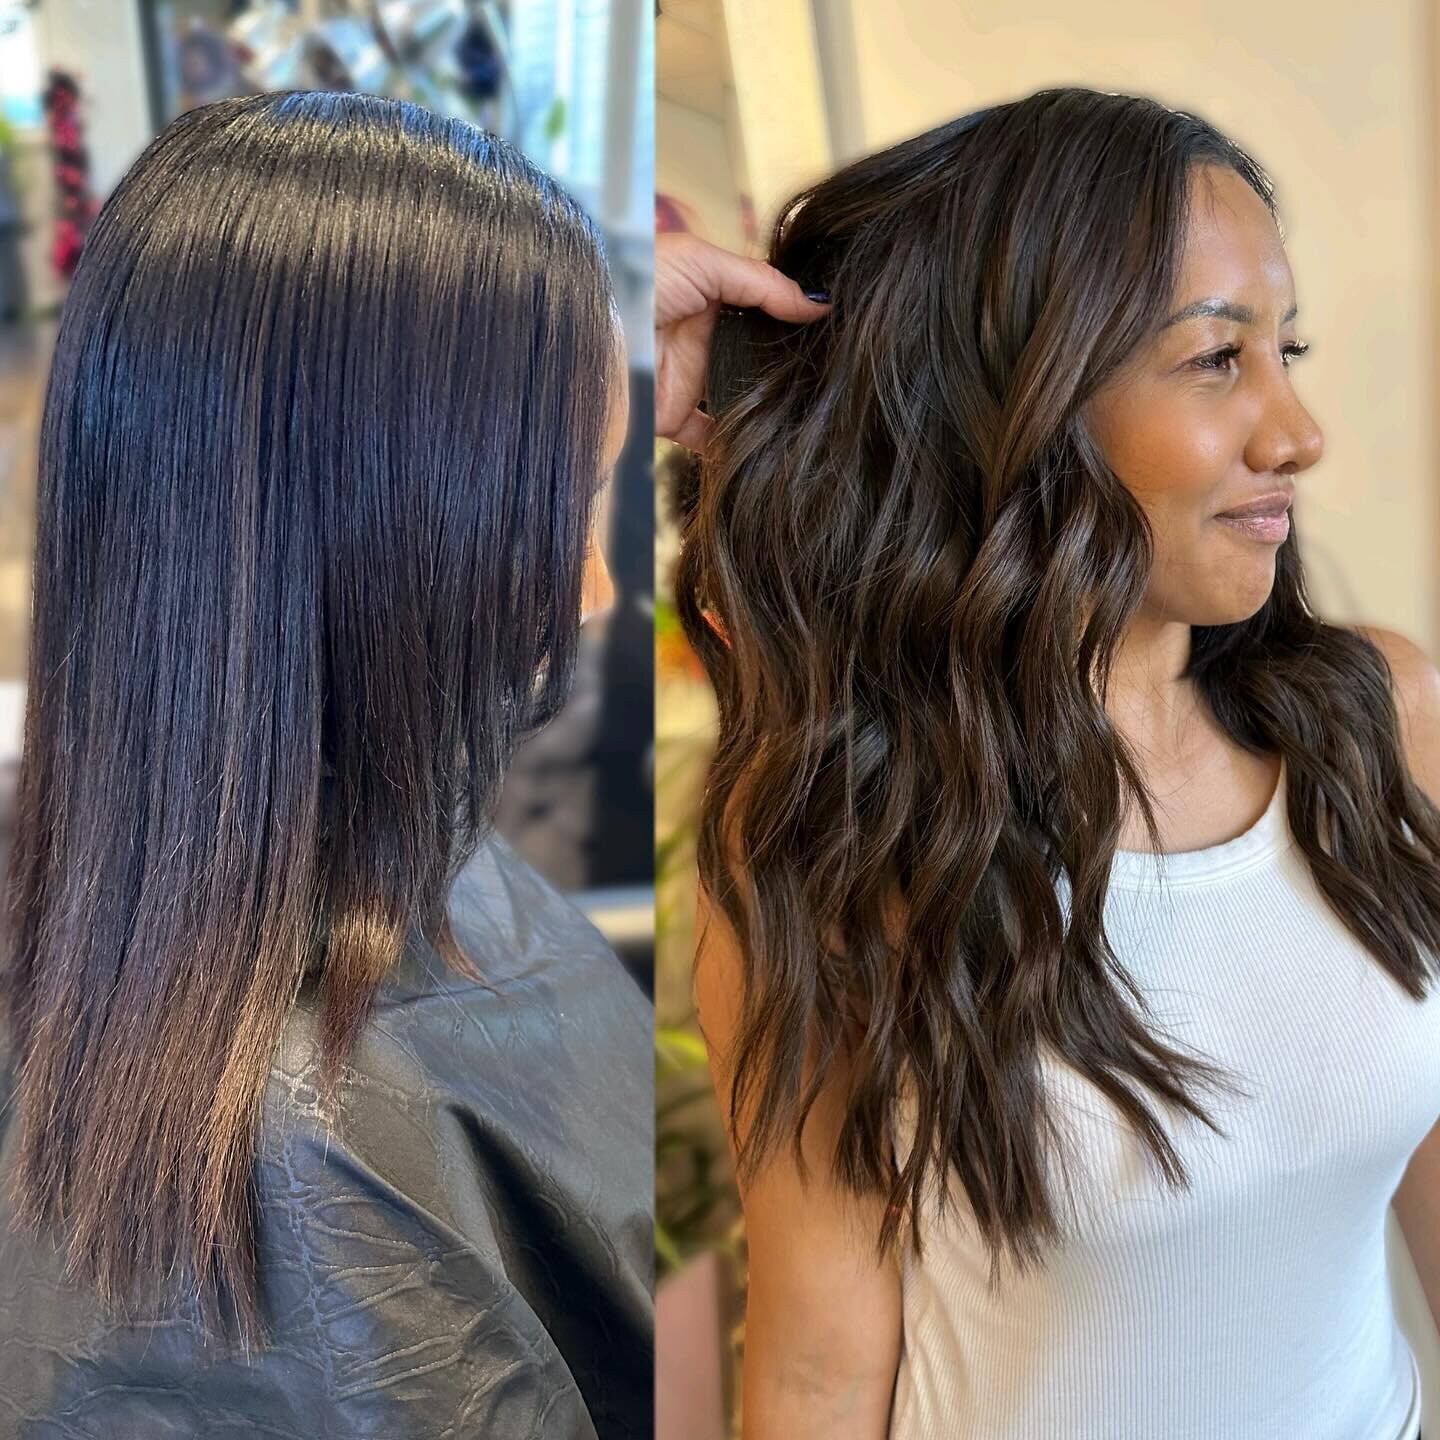 No one really will EVER know.
.
This was such a fun makeover and just in time for her wedding!
.
2 Rows of @invisiblebeadextensions 
18 in 
.
Swipe👈🏽 to see some dang good stitch work, thanks to my Masters program!
If your interested in seeing if I